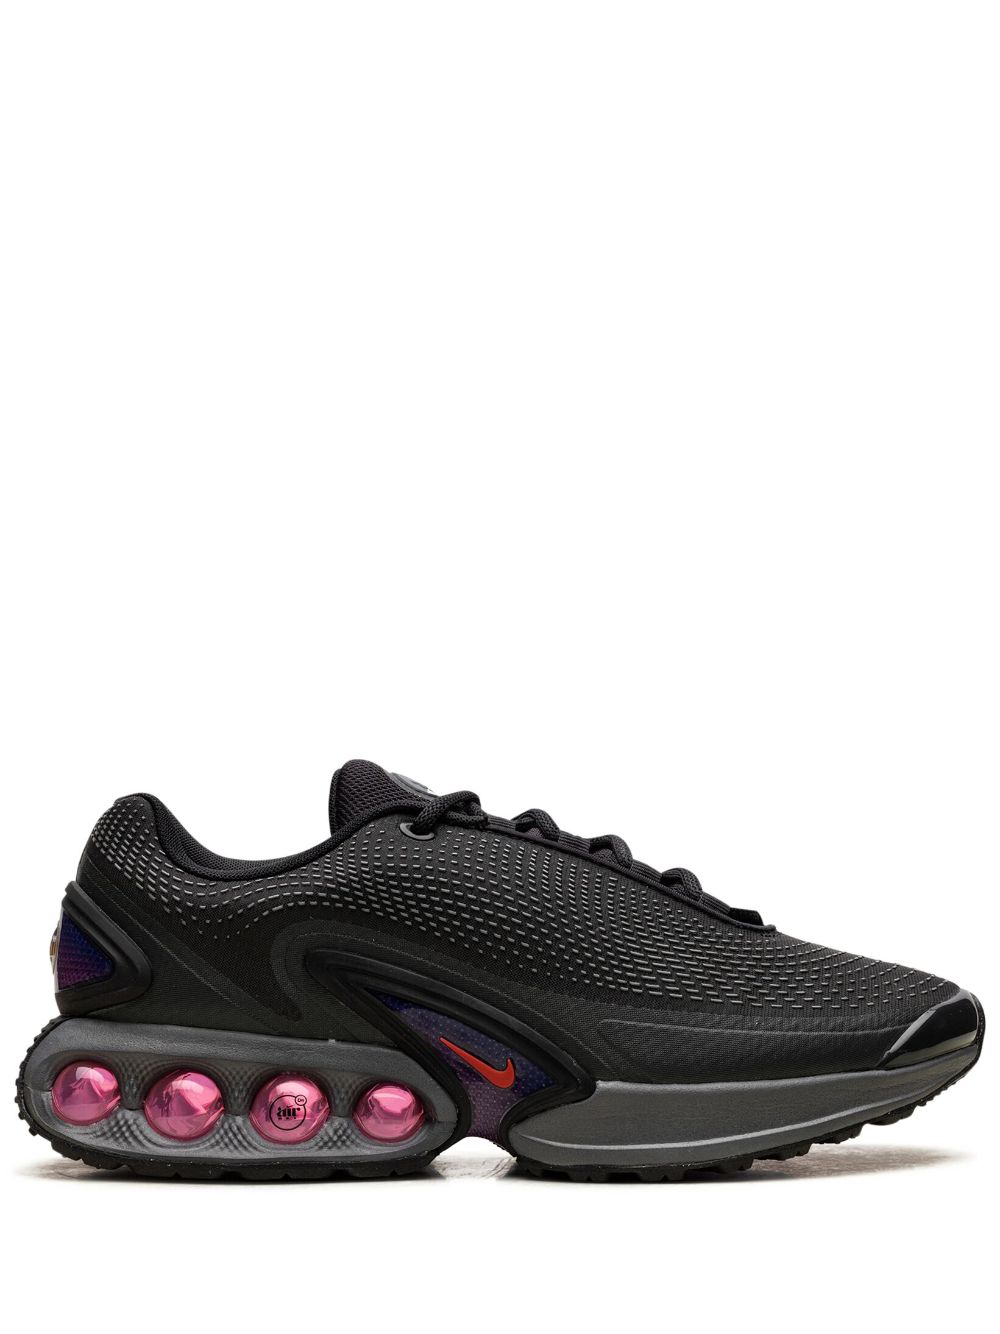 Image 1 of Nike baskets Air Max Dn 'All Night'